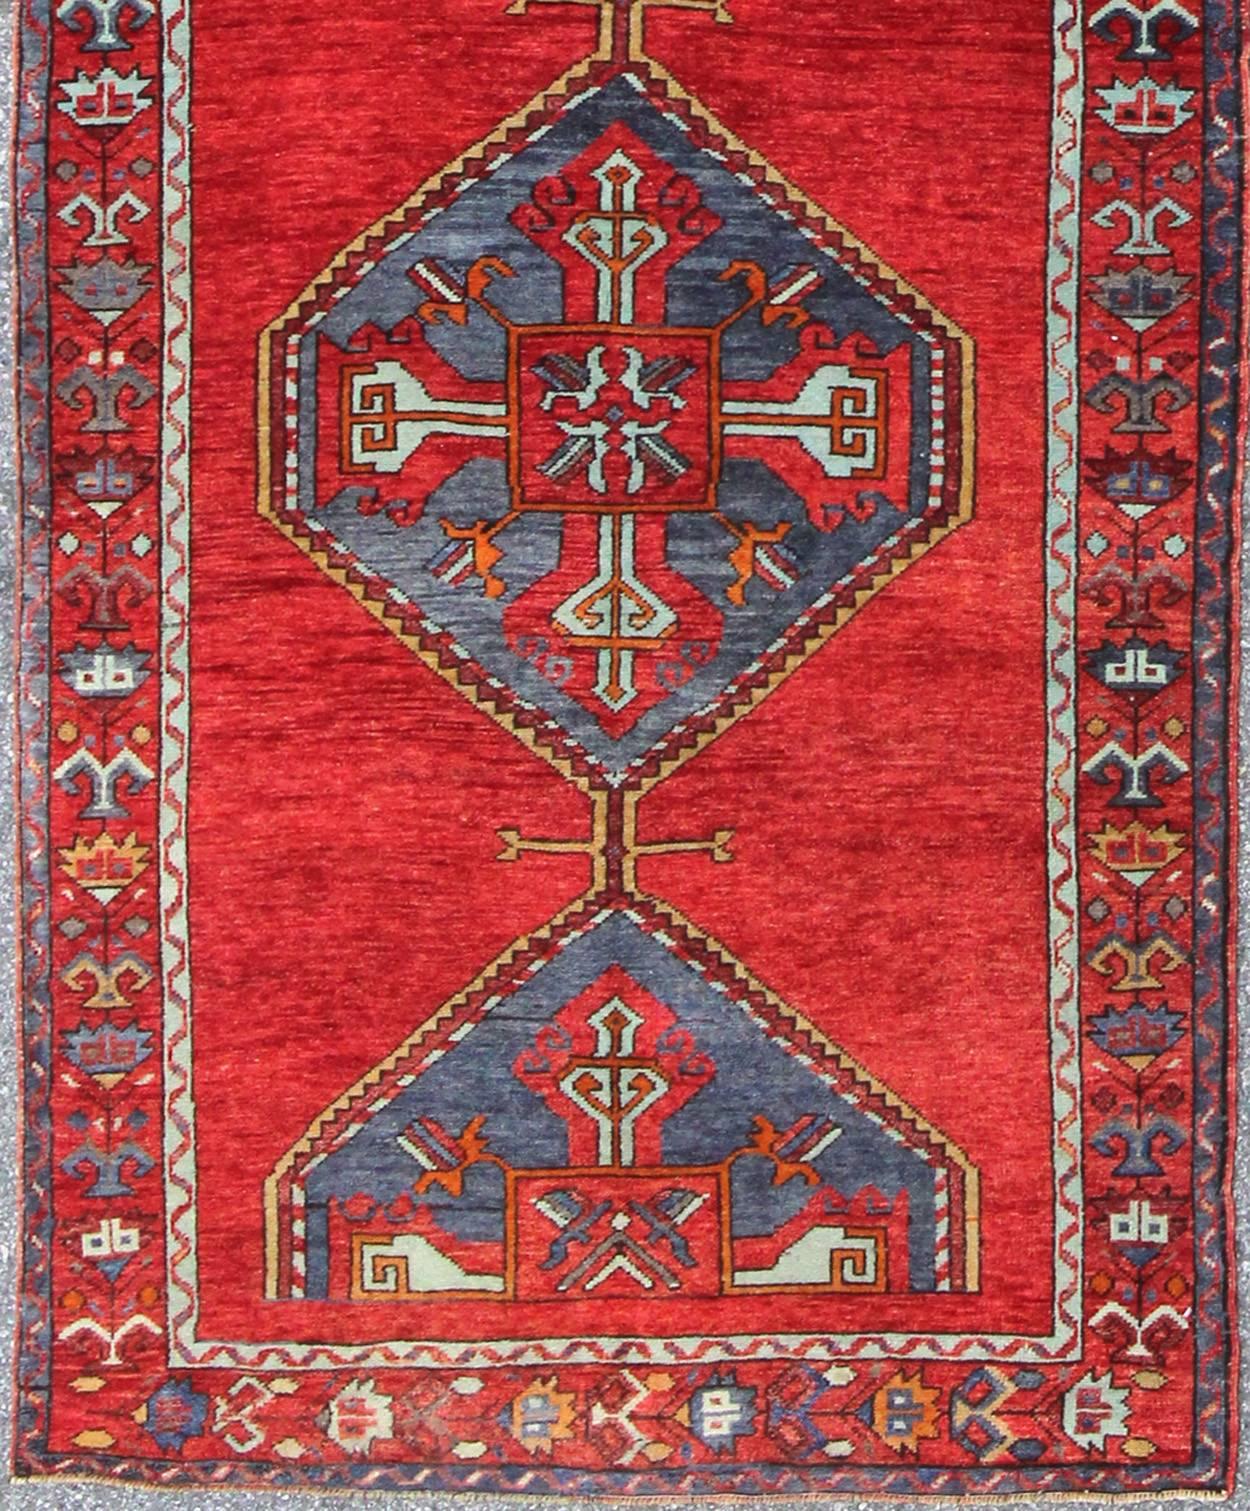 Colorful Turkish Oushak Runner in Various Shades of Red, Blue, and Yellow, En-142354, 1940’s Vintage Turkish Oushak Gallery Rug
This Turkish Oushak runner features a central medallion design as well as patterns of smaller, geometric motifs. Colors